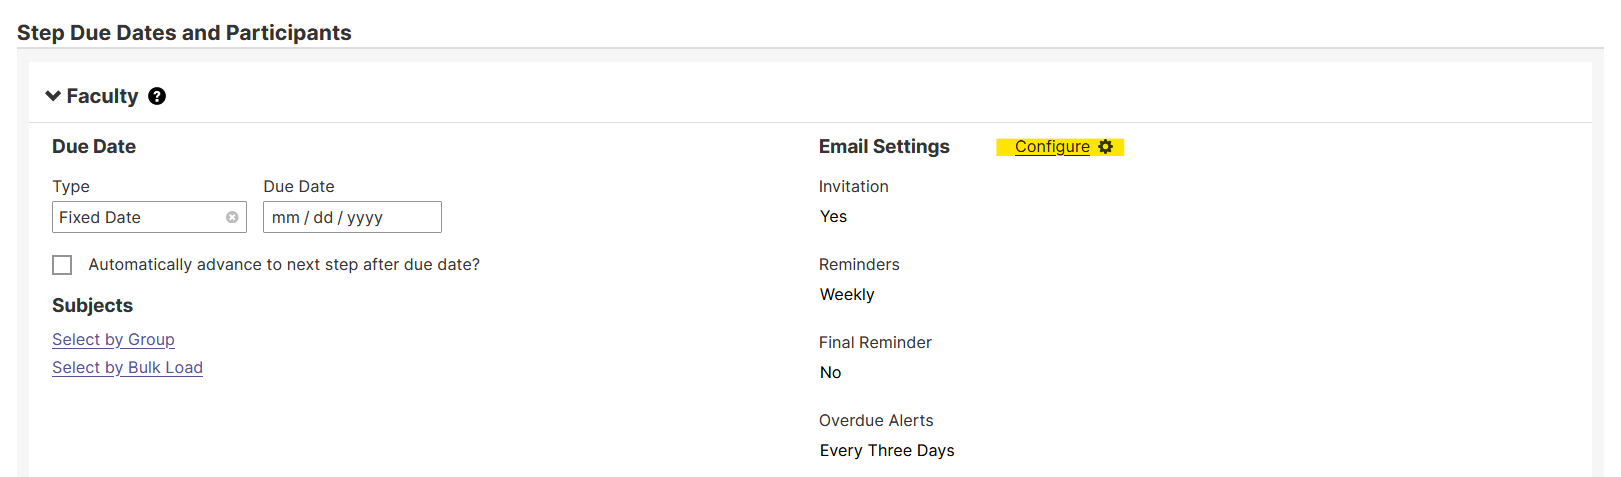 wf-emailsettings-configure.png